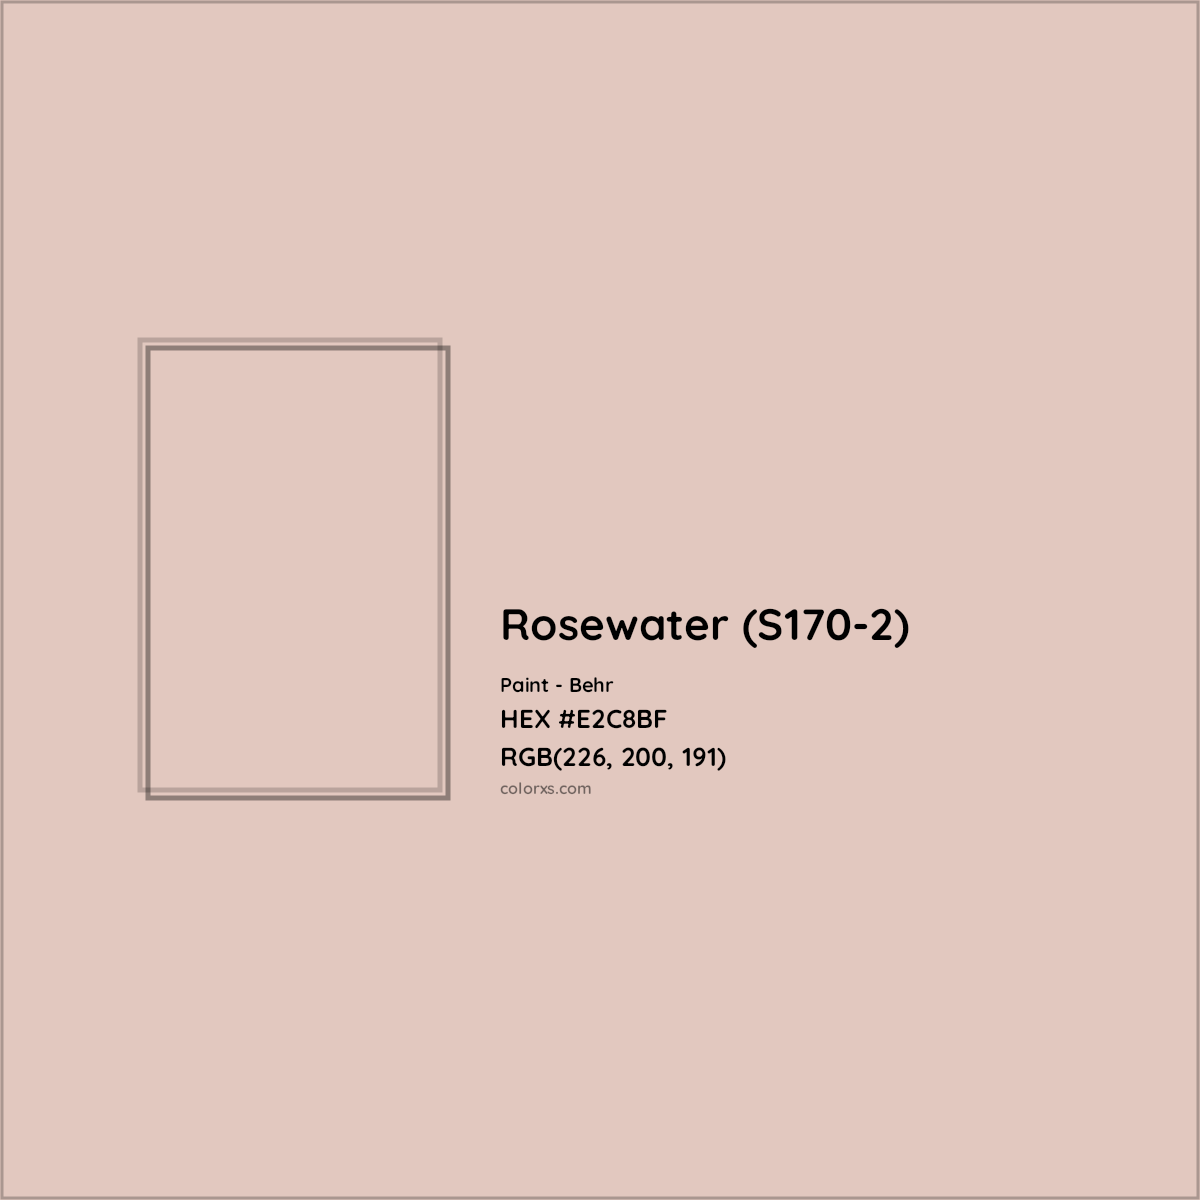 HEX #E2C8BF Rosewater (S170-2) Paint Behr - Color Code